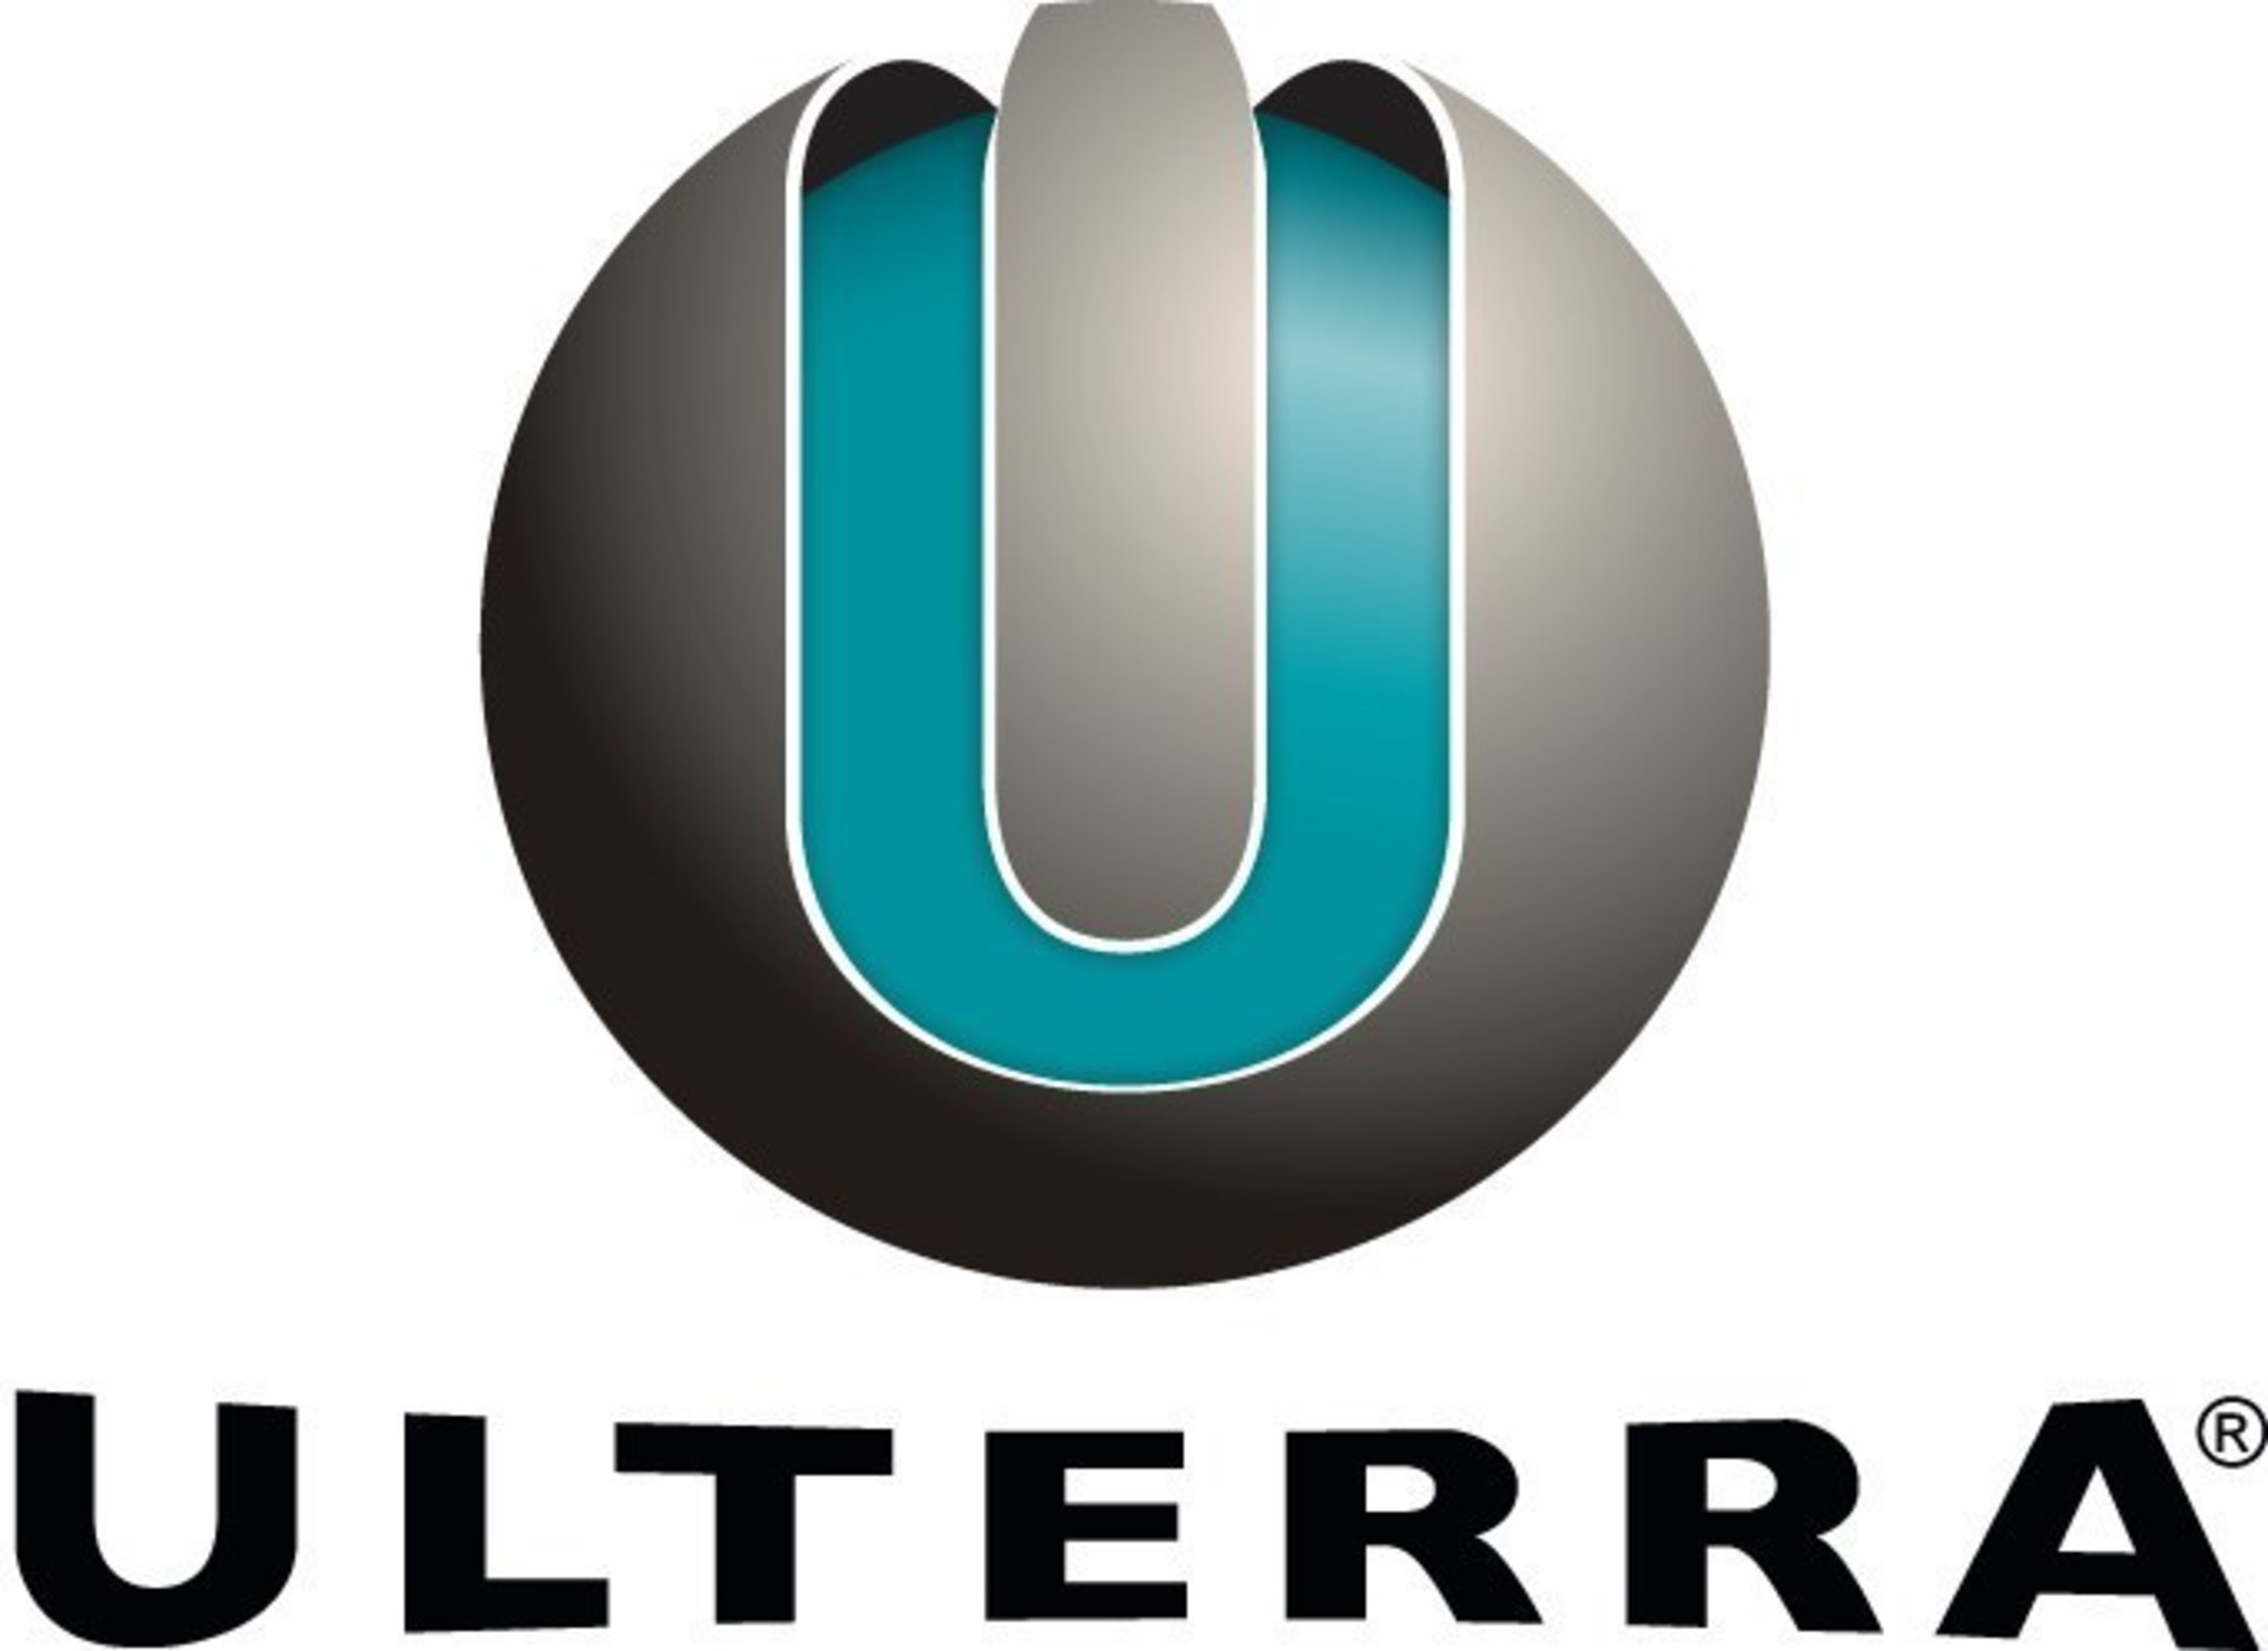 Ulterra is a leading provider of premium PDC drill bits and downhole tools for the oil and gas industry.